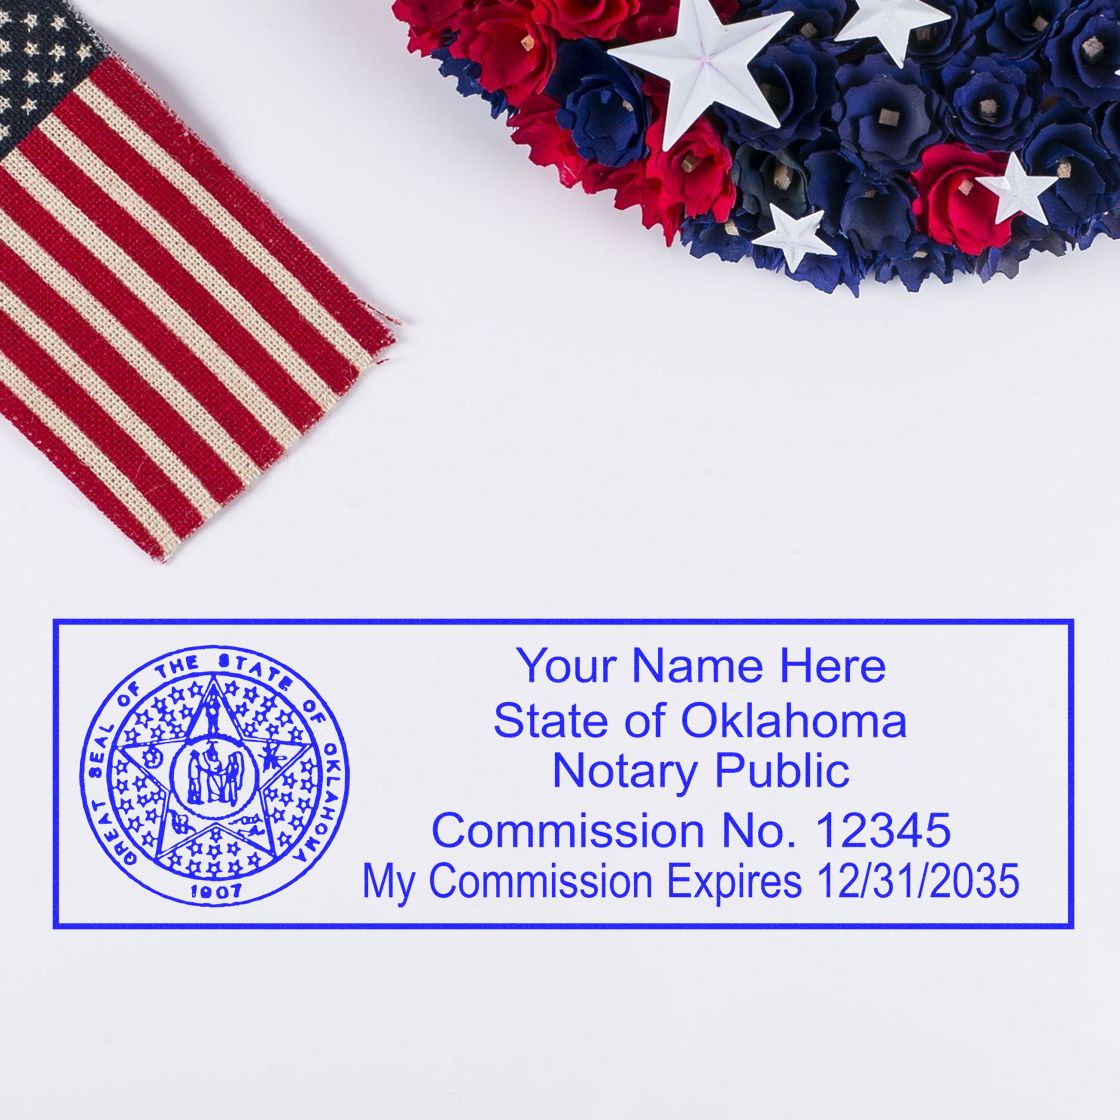 The MaxLight Premium Pre-Inked Oklahoma State Seal Notarial Stamp stamp impression comes to life with a crisp, detailed photo on paper - showcasing true professional quality.